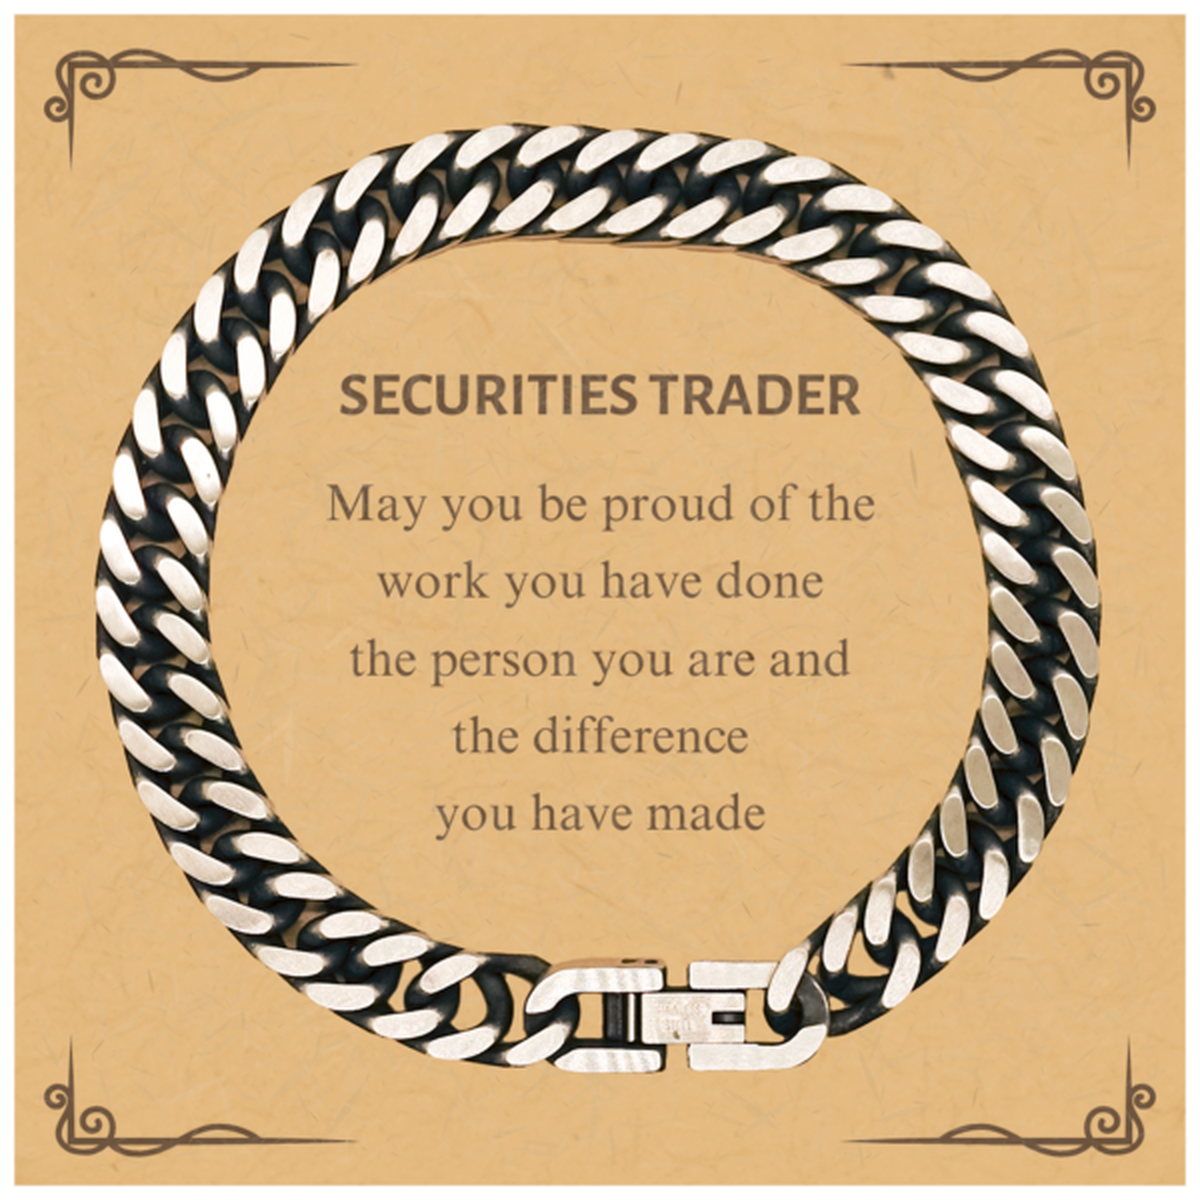 Securities Trader May you be proud of the work you have done, Retirement Securities Trader Cuban Link Chain Bracelet for Colleague Appreciation Gifts Amazing for Securities Trader